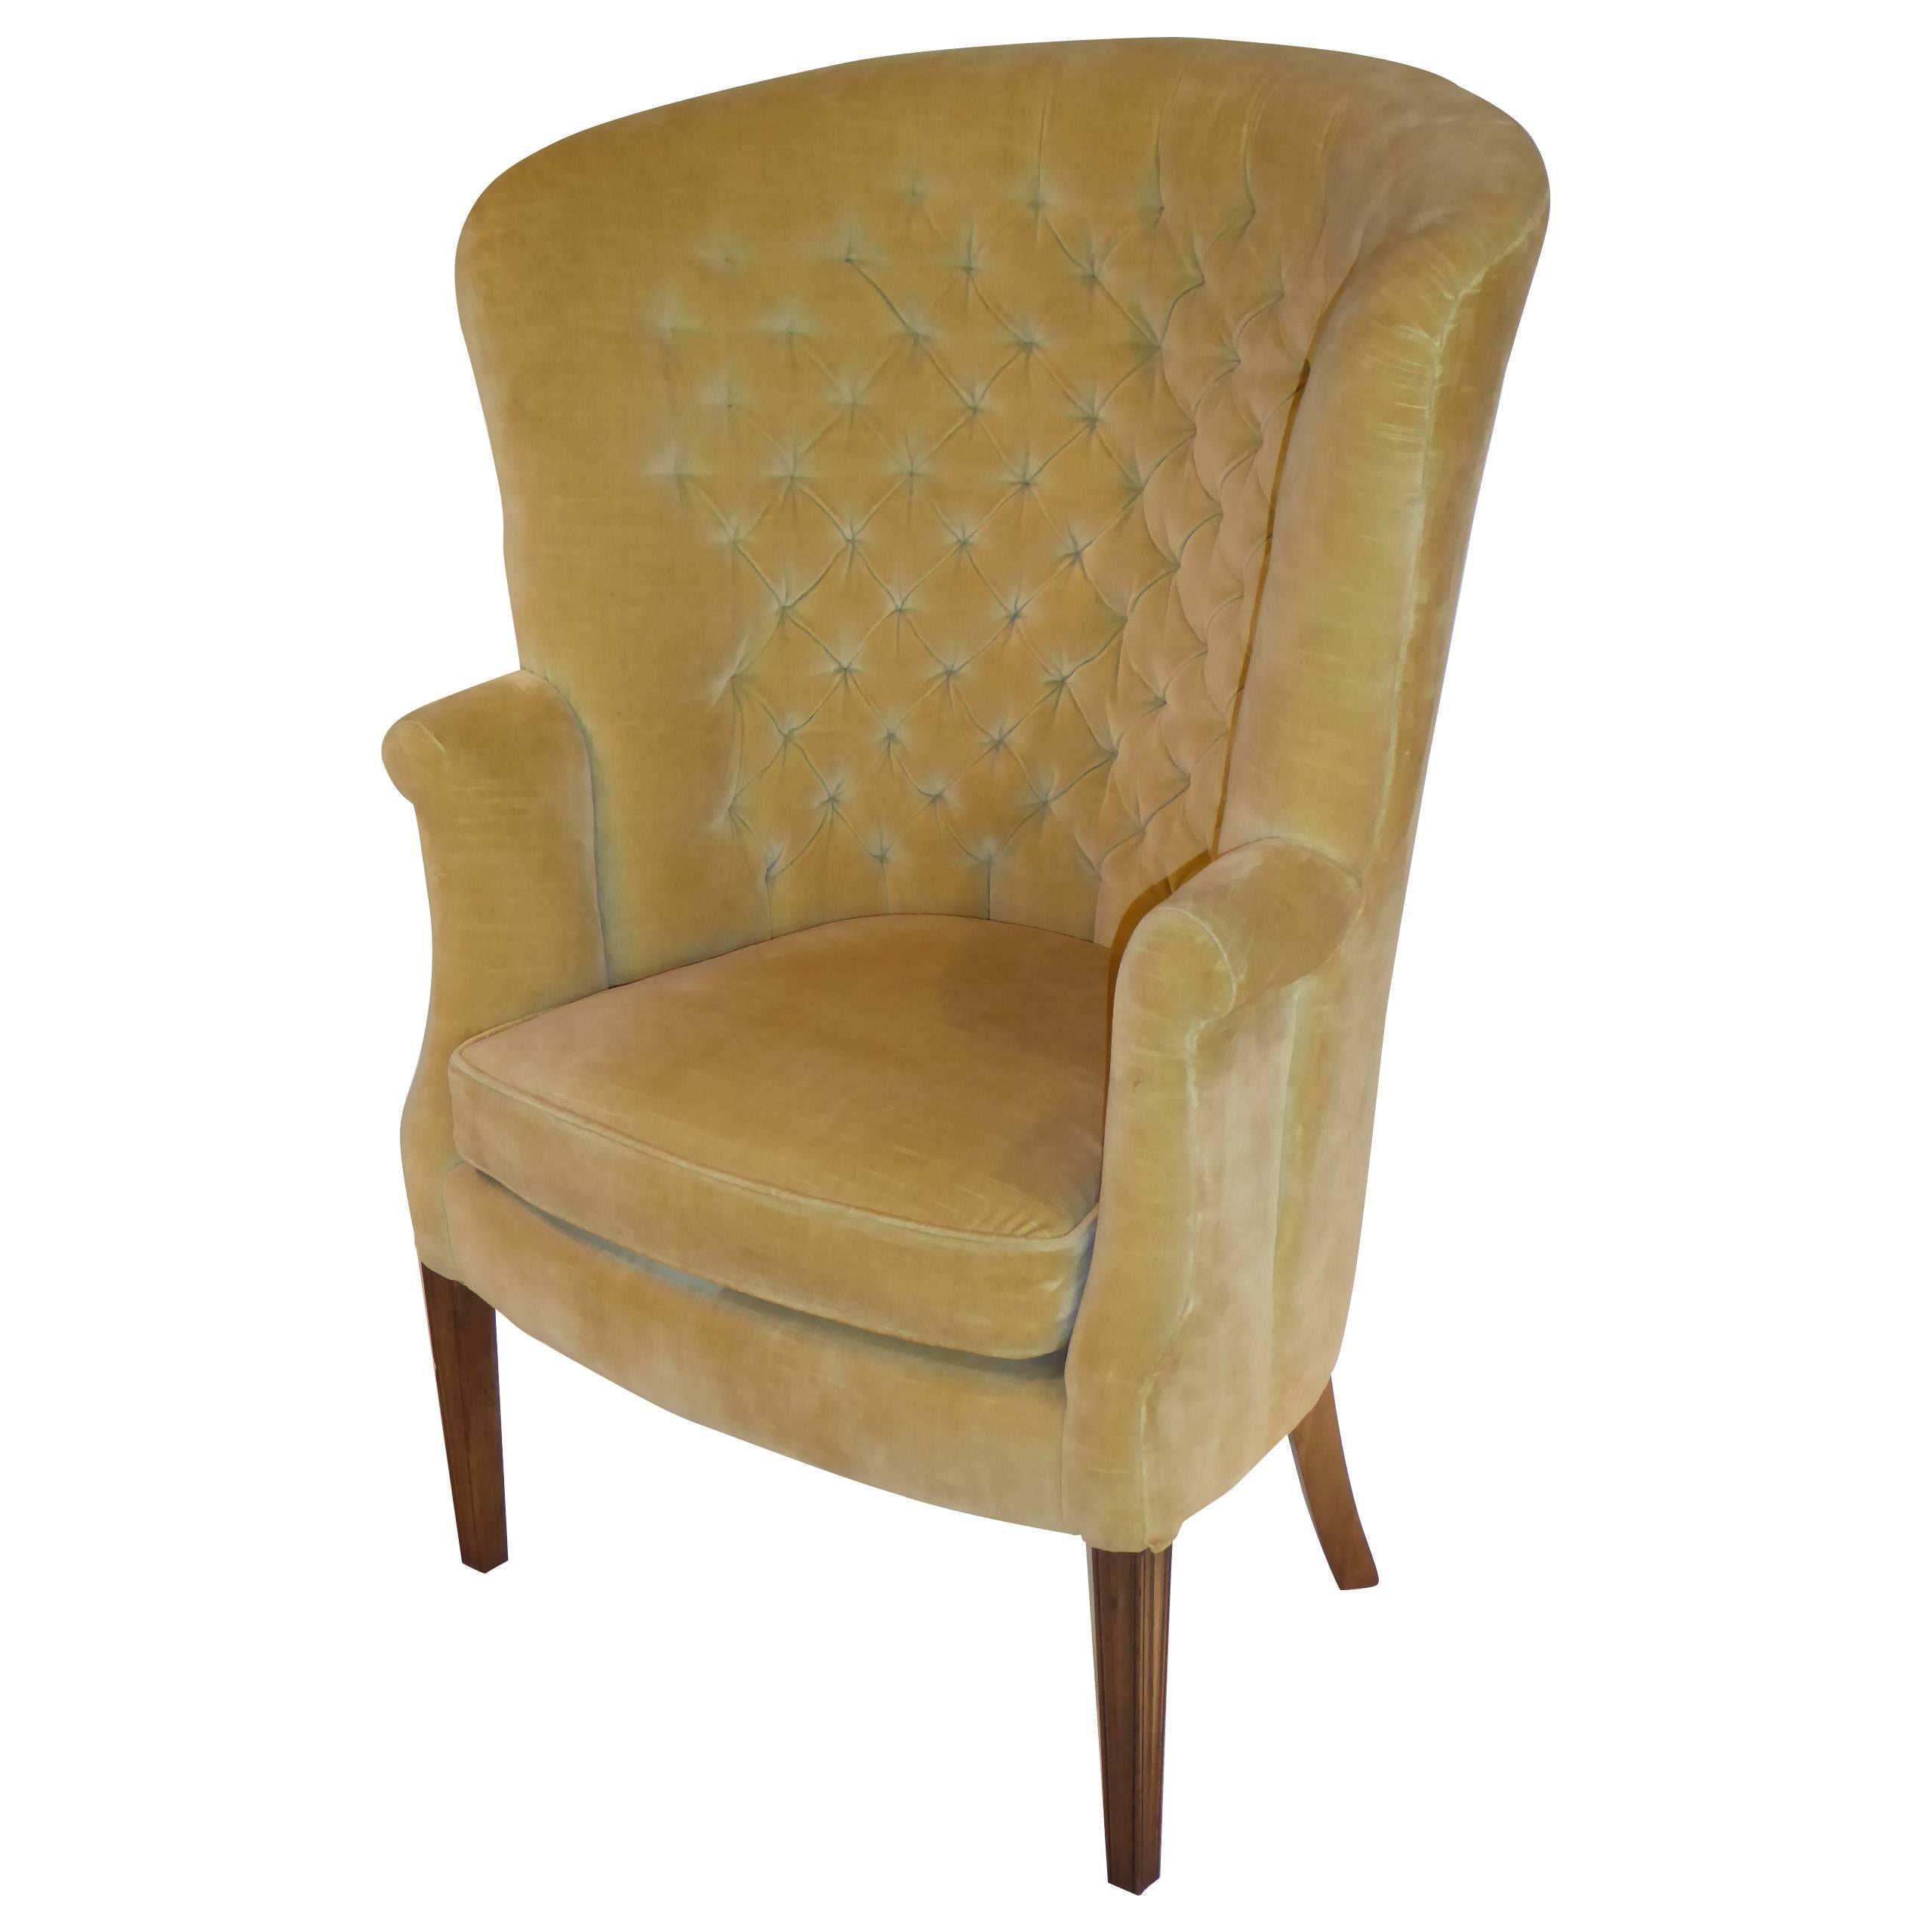 Architectural High Back Tufted Velvet Wingback Chair